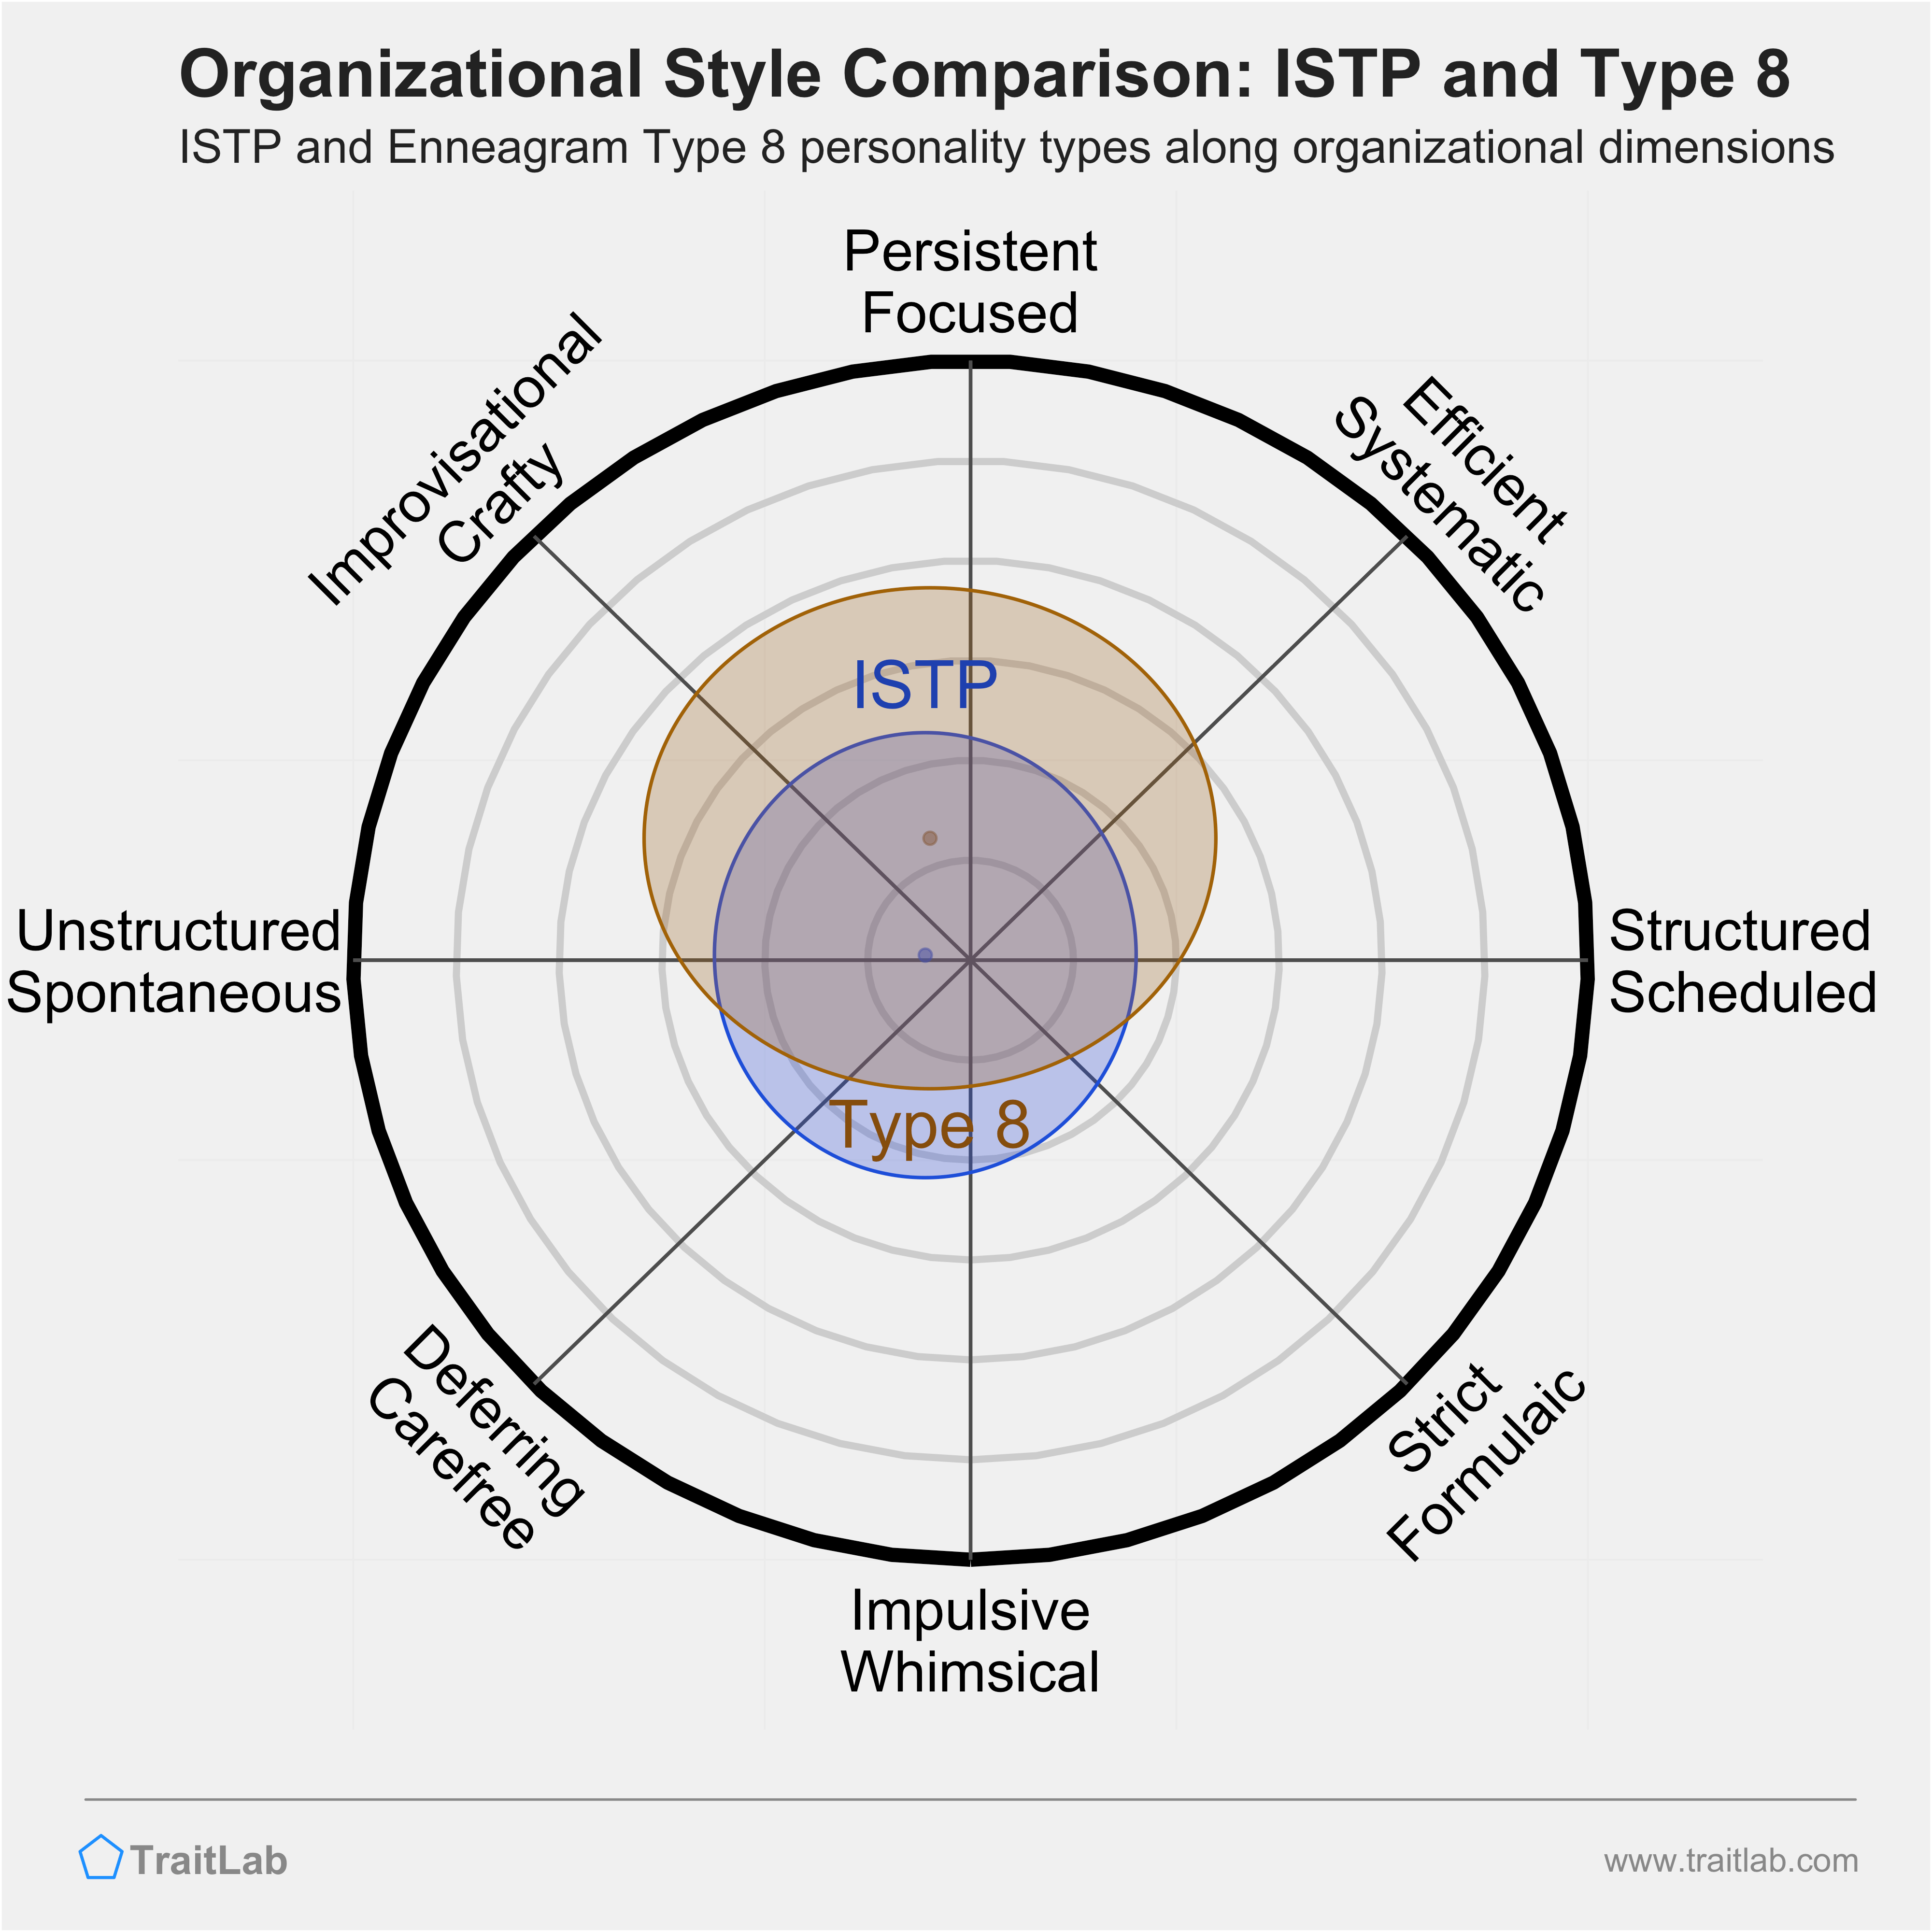 ISTP and Type 8 comparison across organizational dimensions